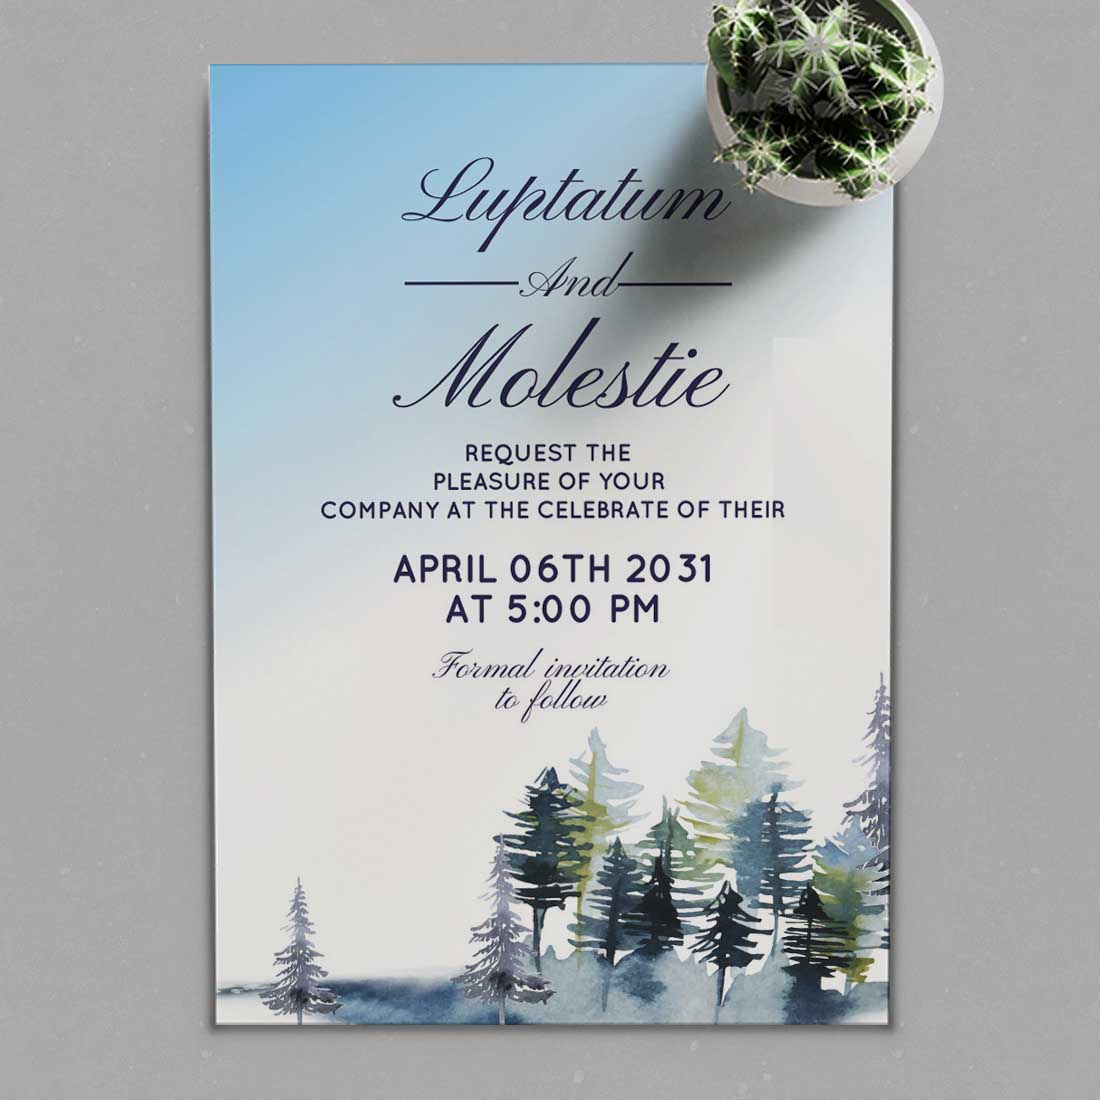 Pine Tree Forest and Winter Wedding Card preview.